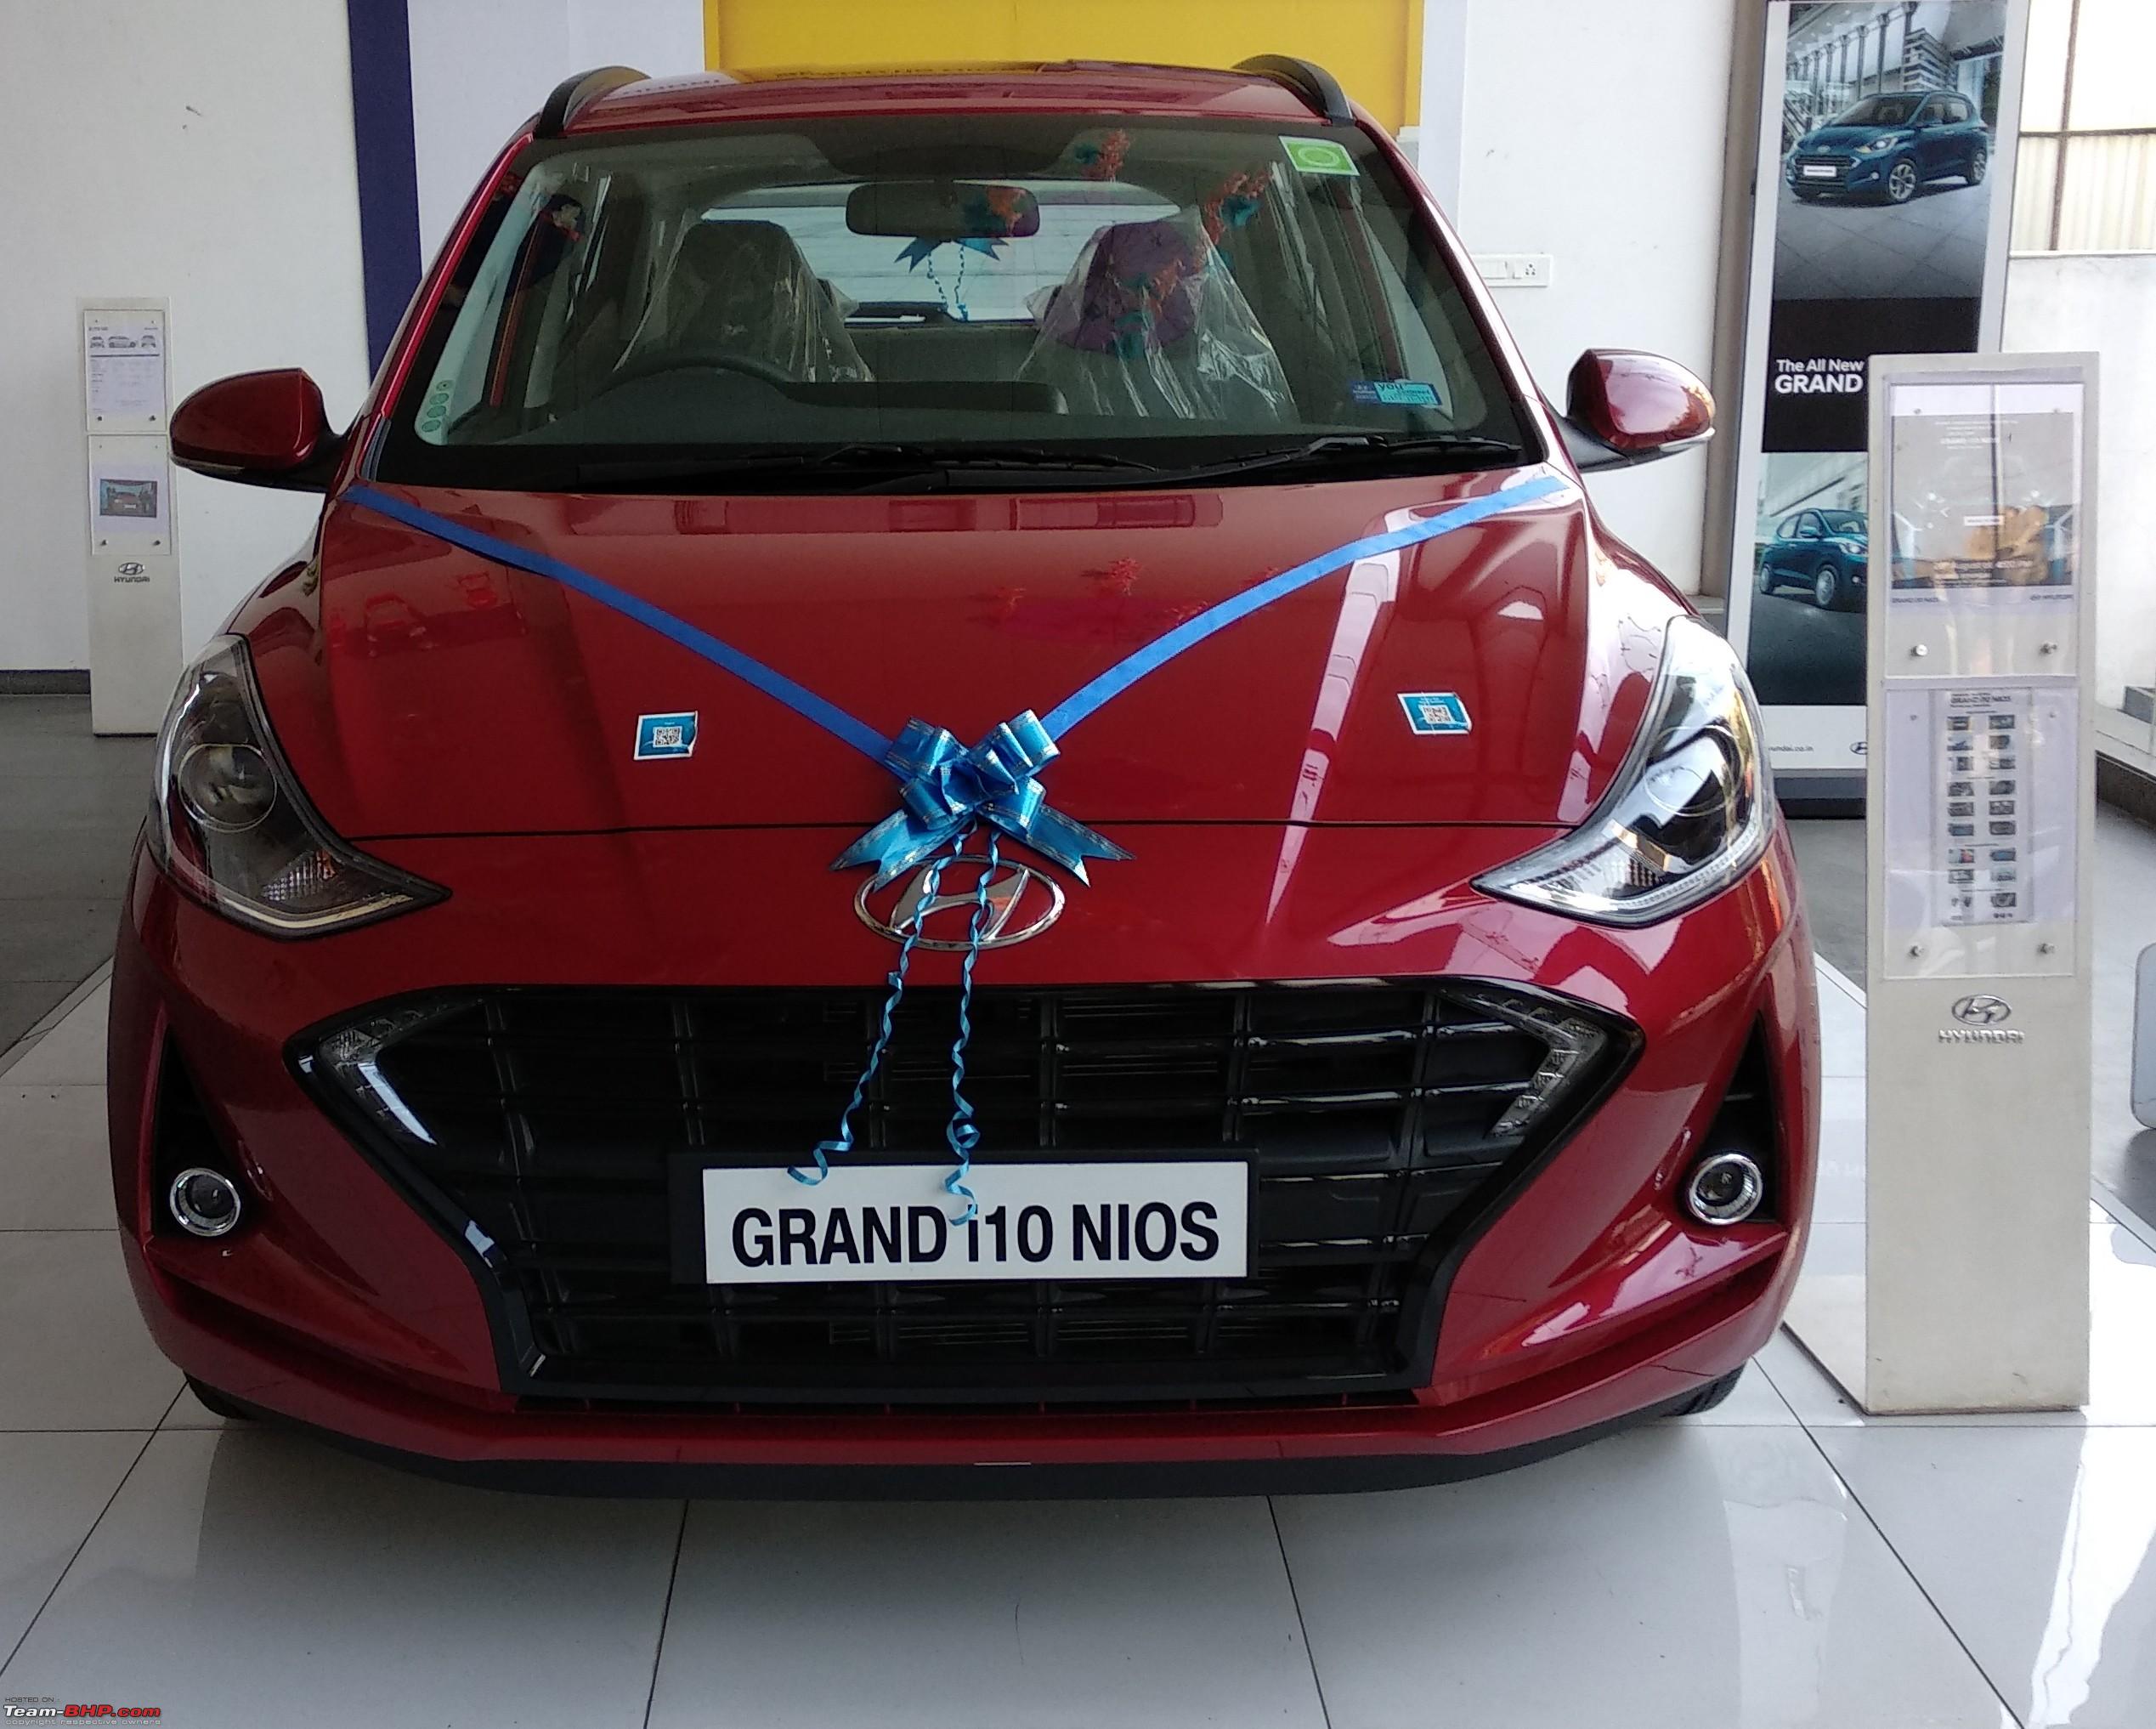 The Hyundai Grand I10 Nios Now Launched At Rs 5 Lakhs